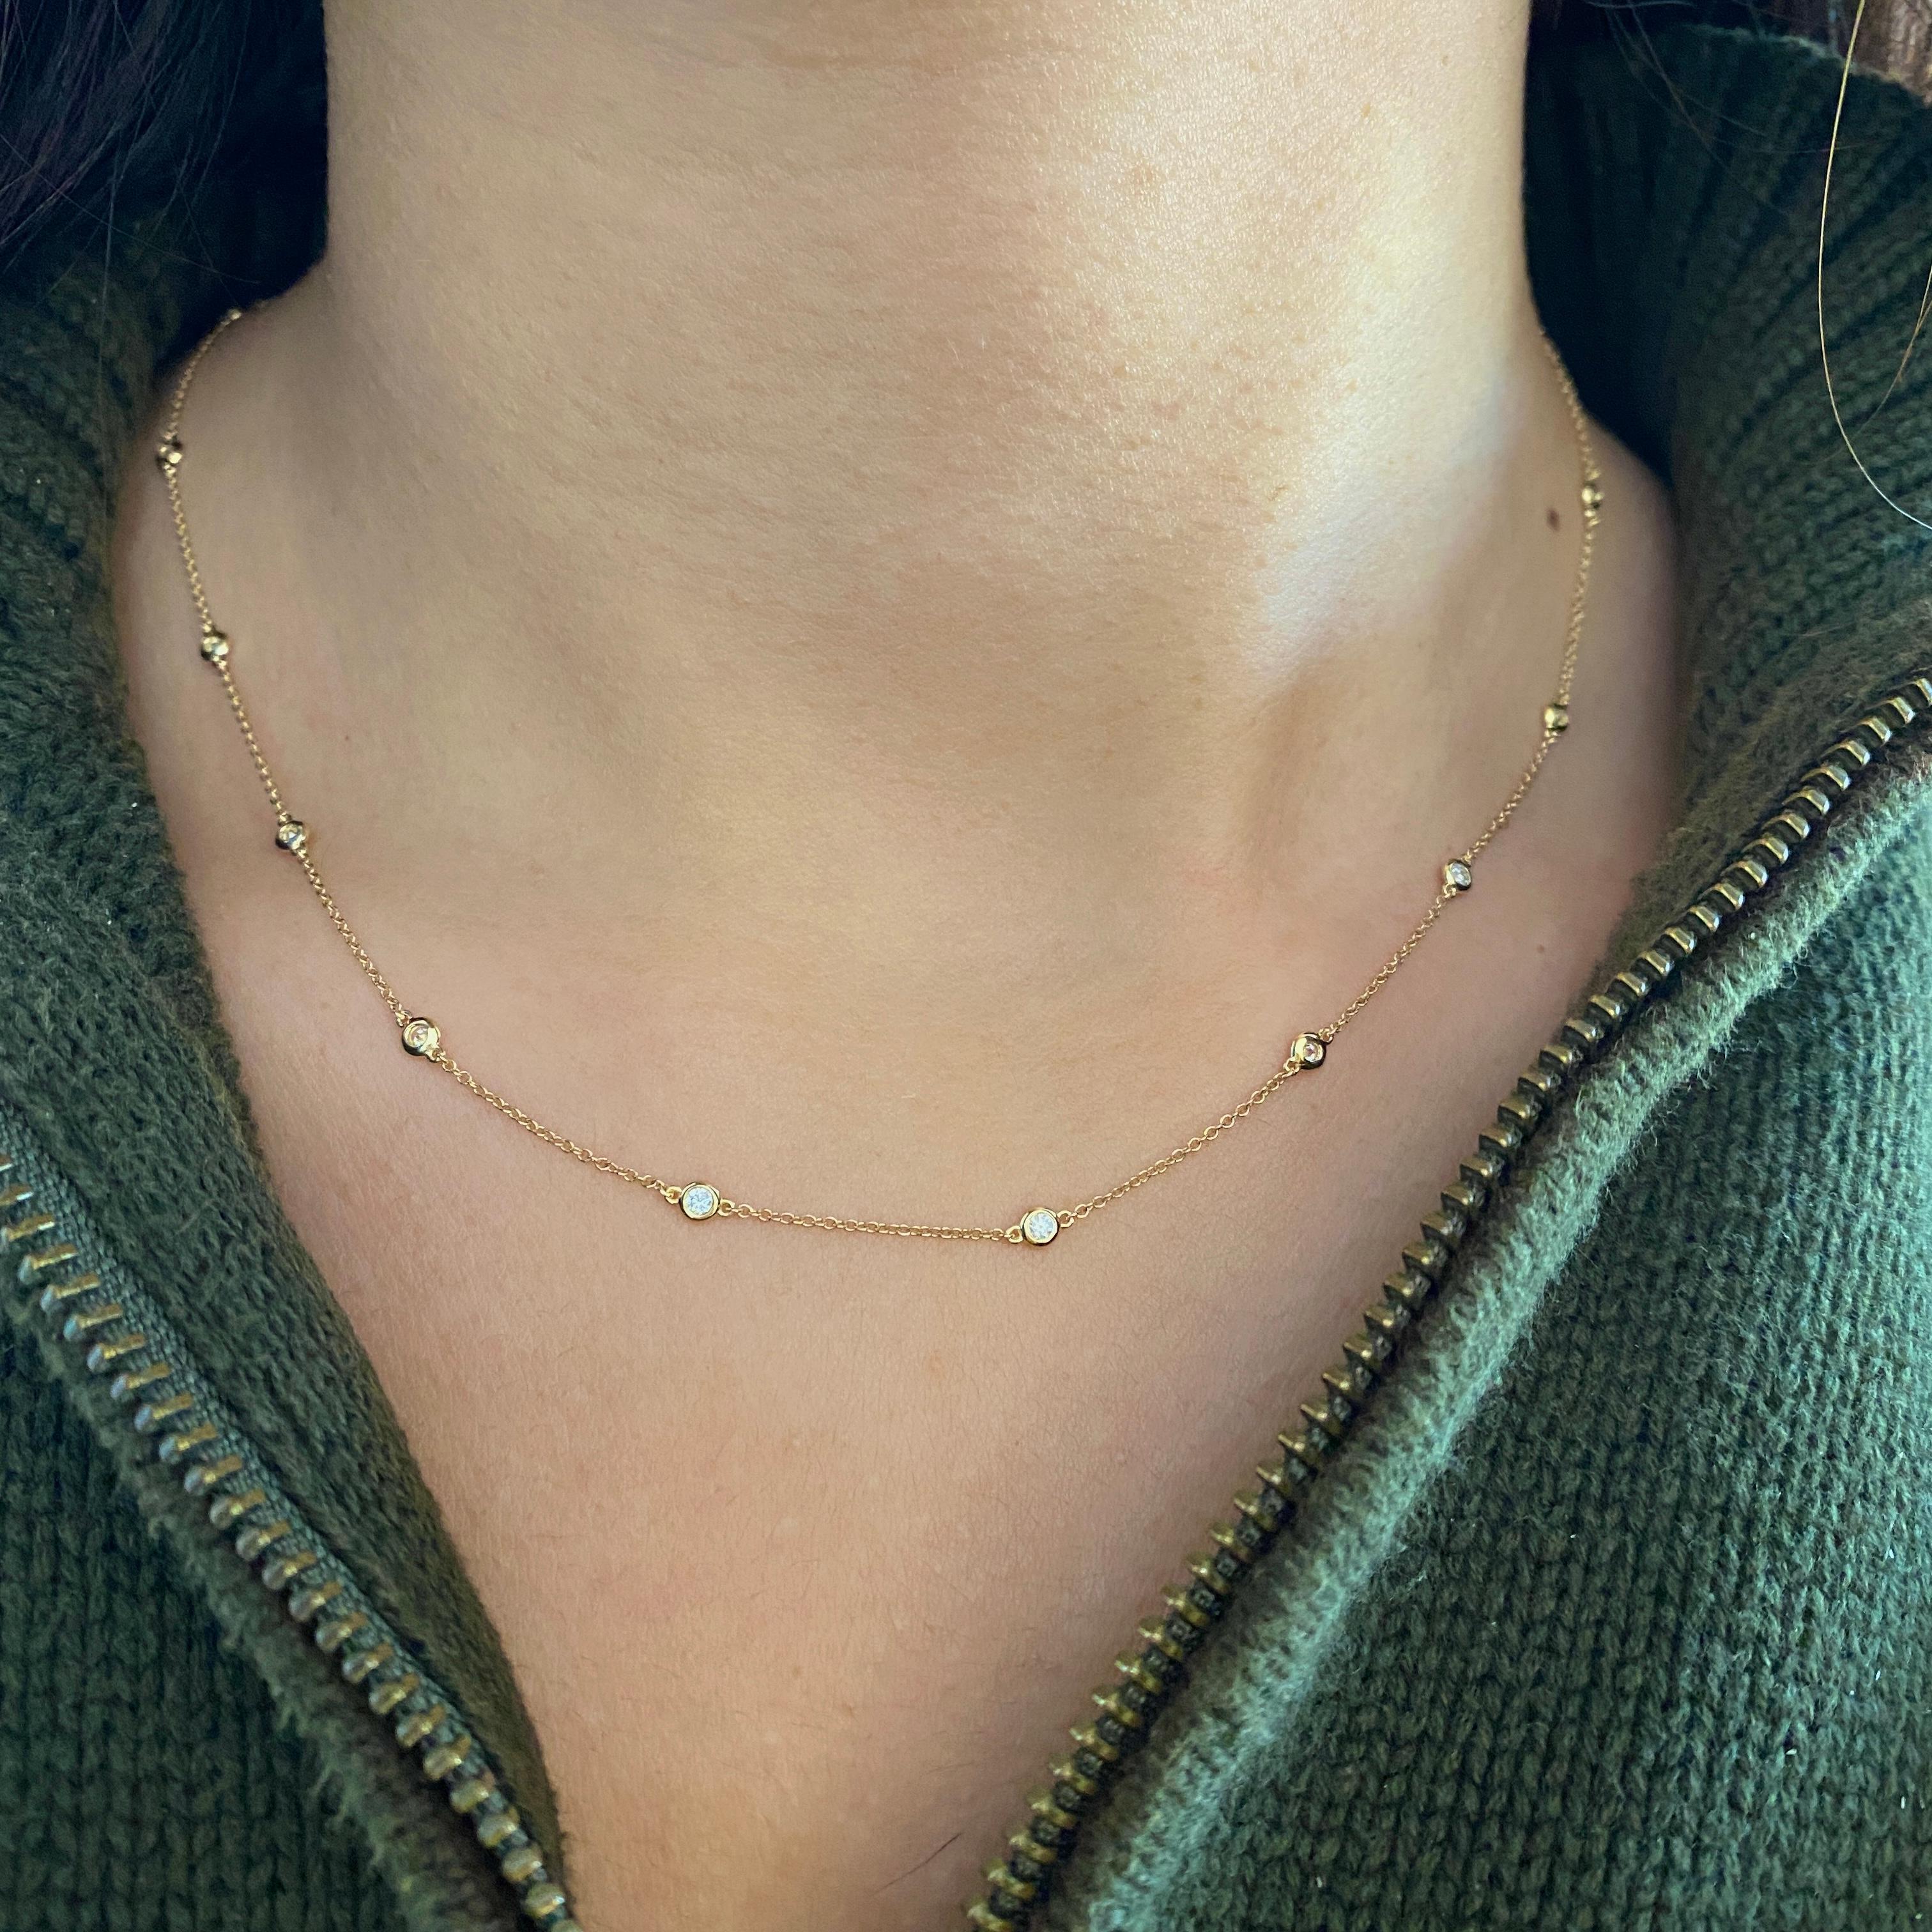 This slim diamond station necklace is a fabulous piece for any day. It layers beautifully for dressing up or dressing down! Fifteen diamonds are set in bezels and spaced about an inch apart across the lovely cable chain. The necklace can be worn by